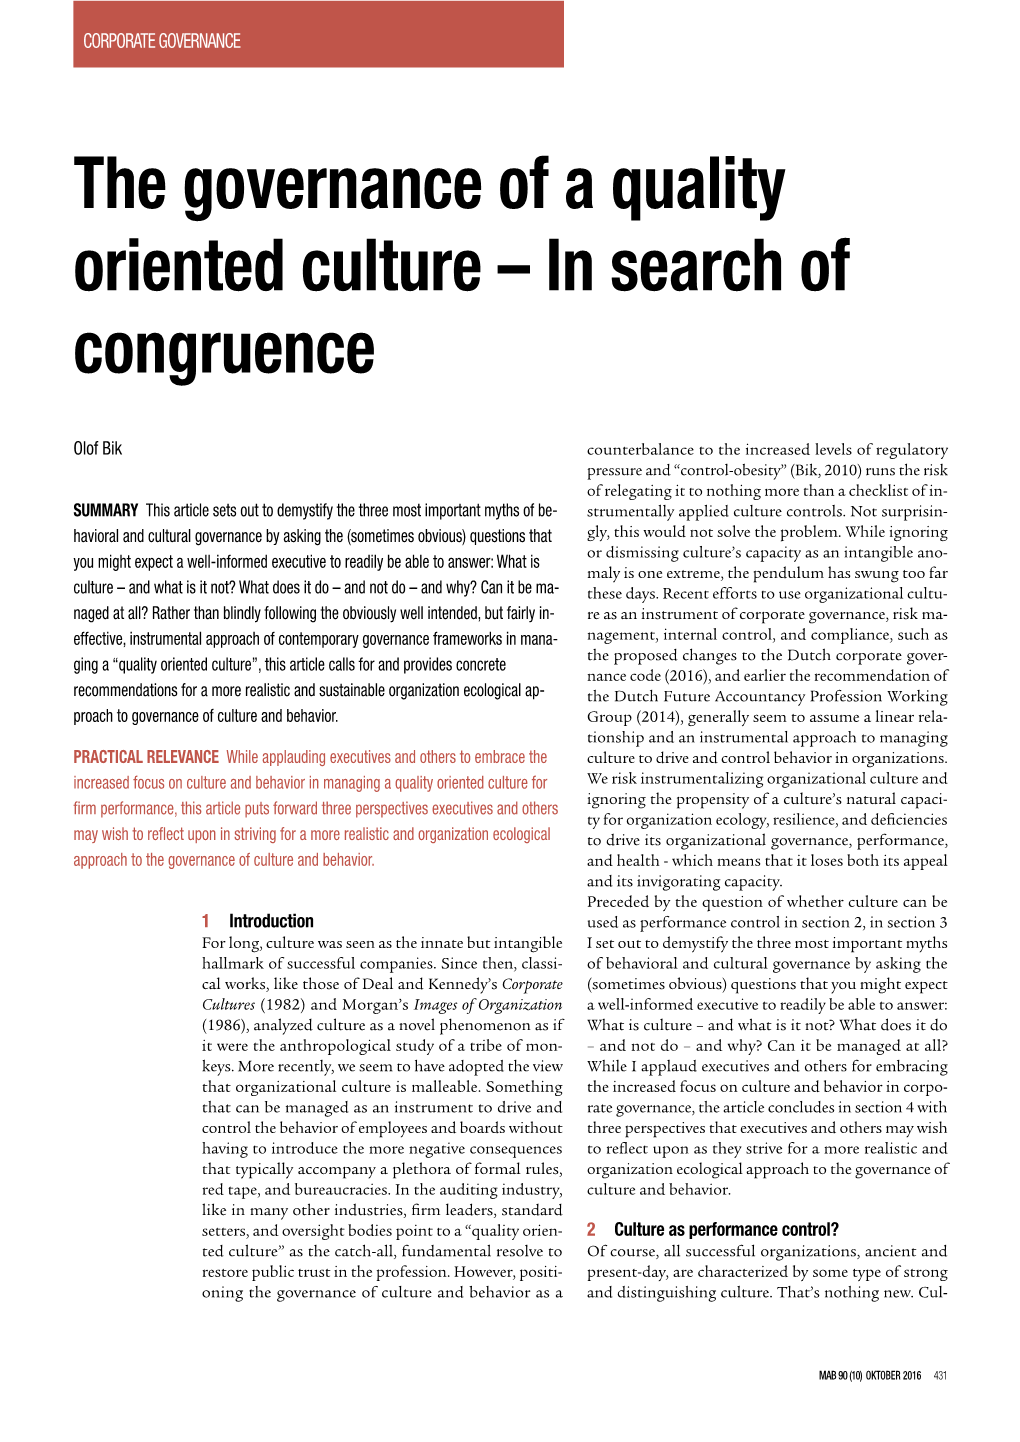 The Governance of a Quality Oriented Culture – in Search of Congruence